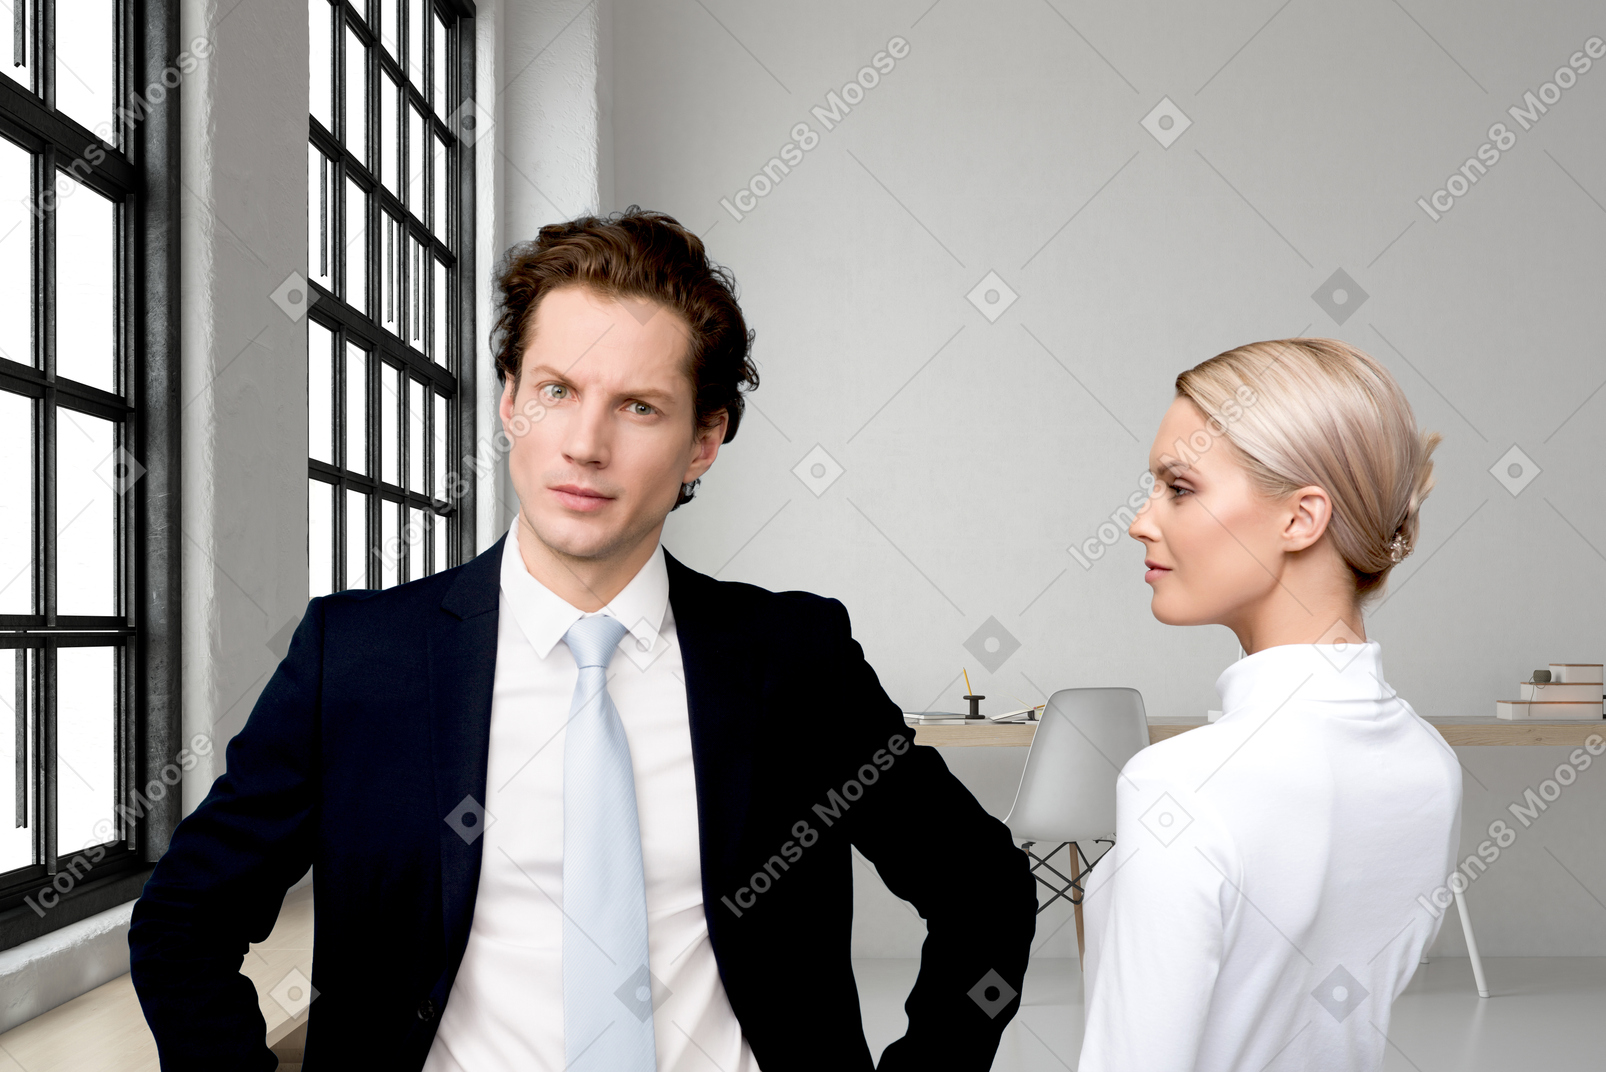 Annoyed businessman and confident woman in the workplace